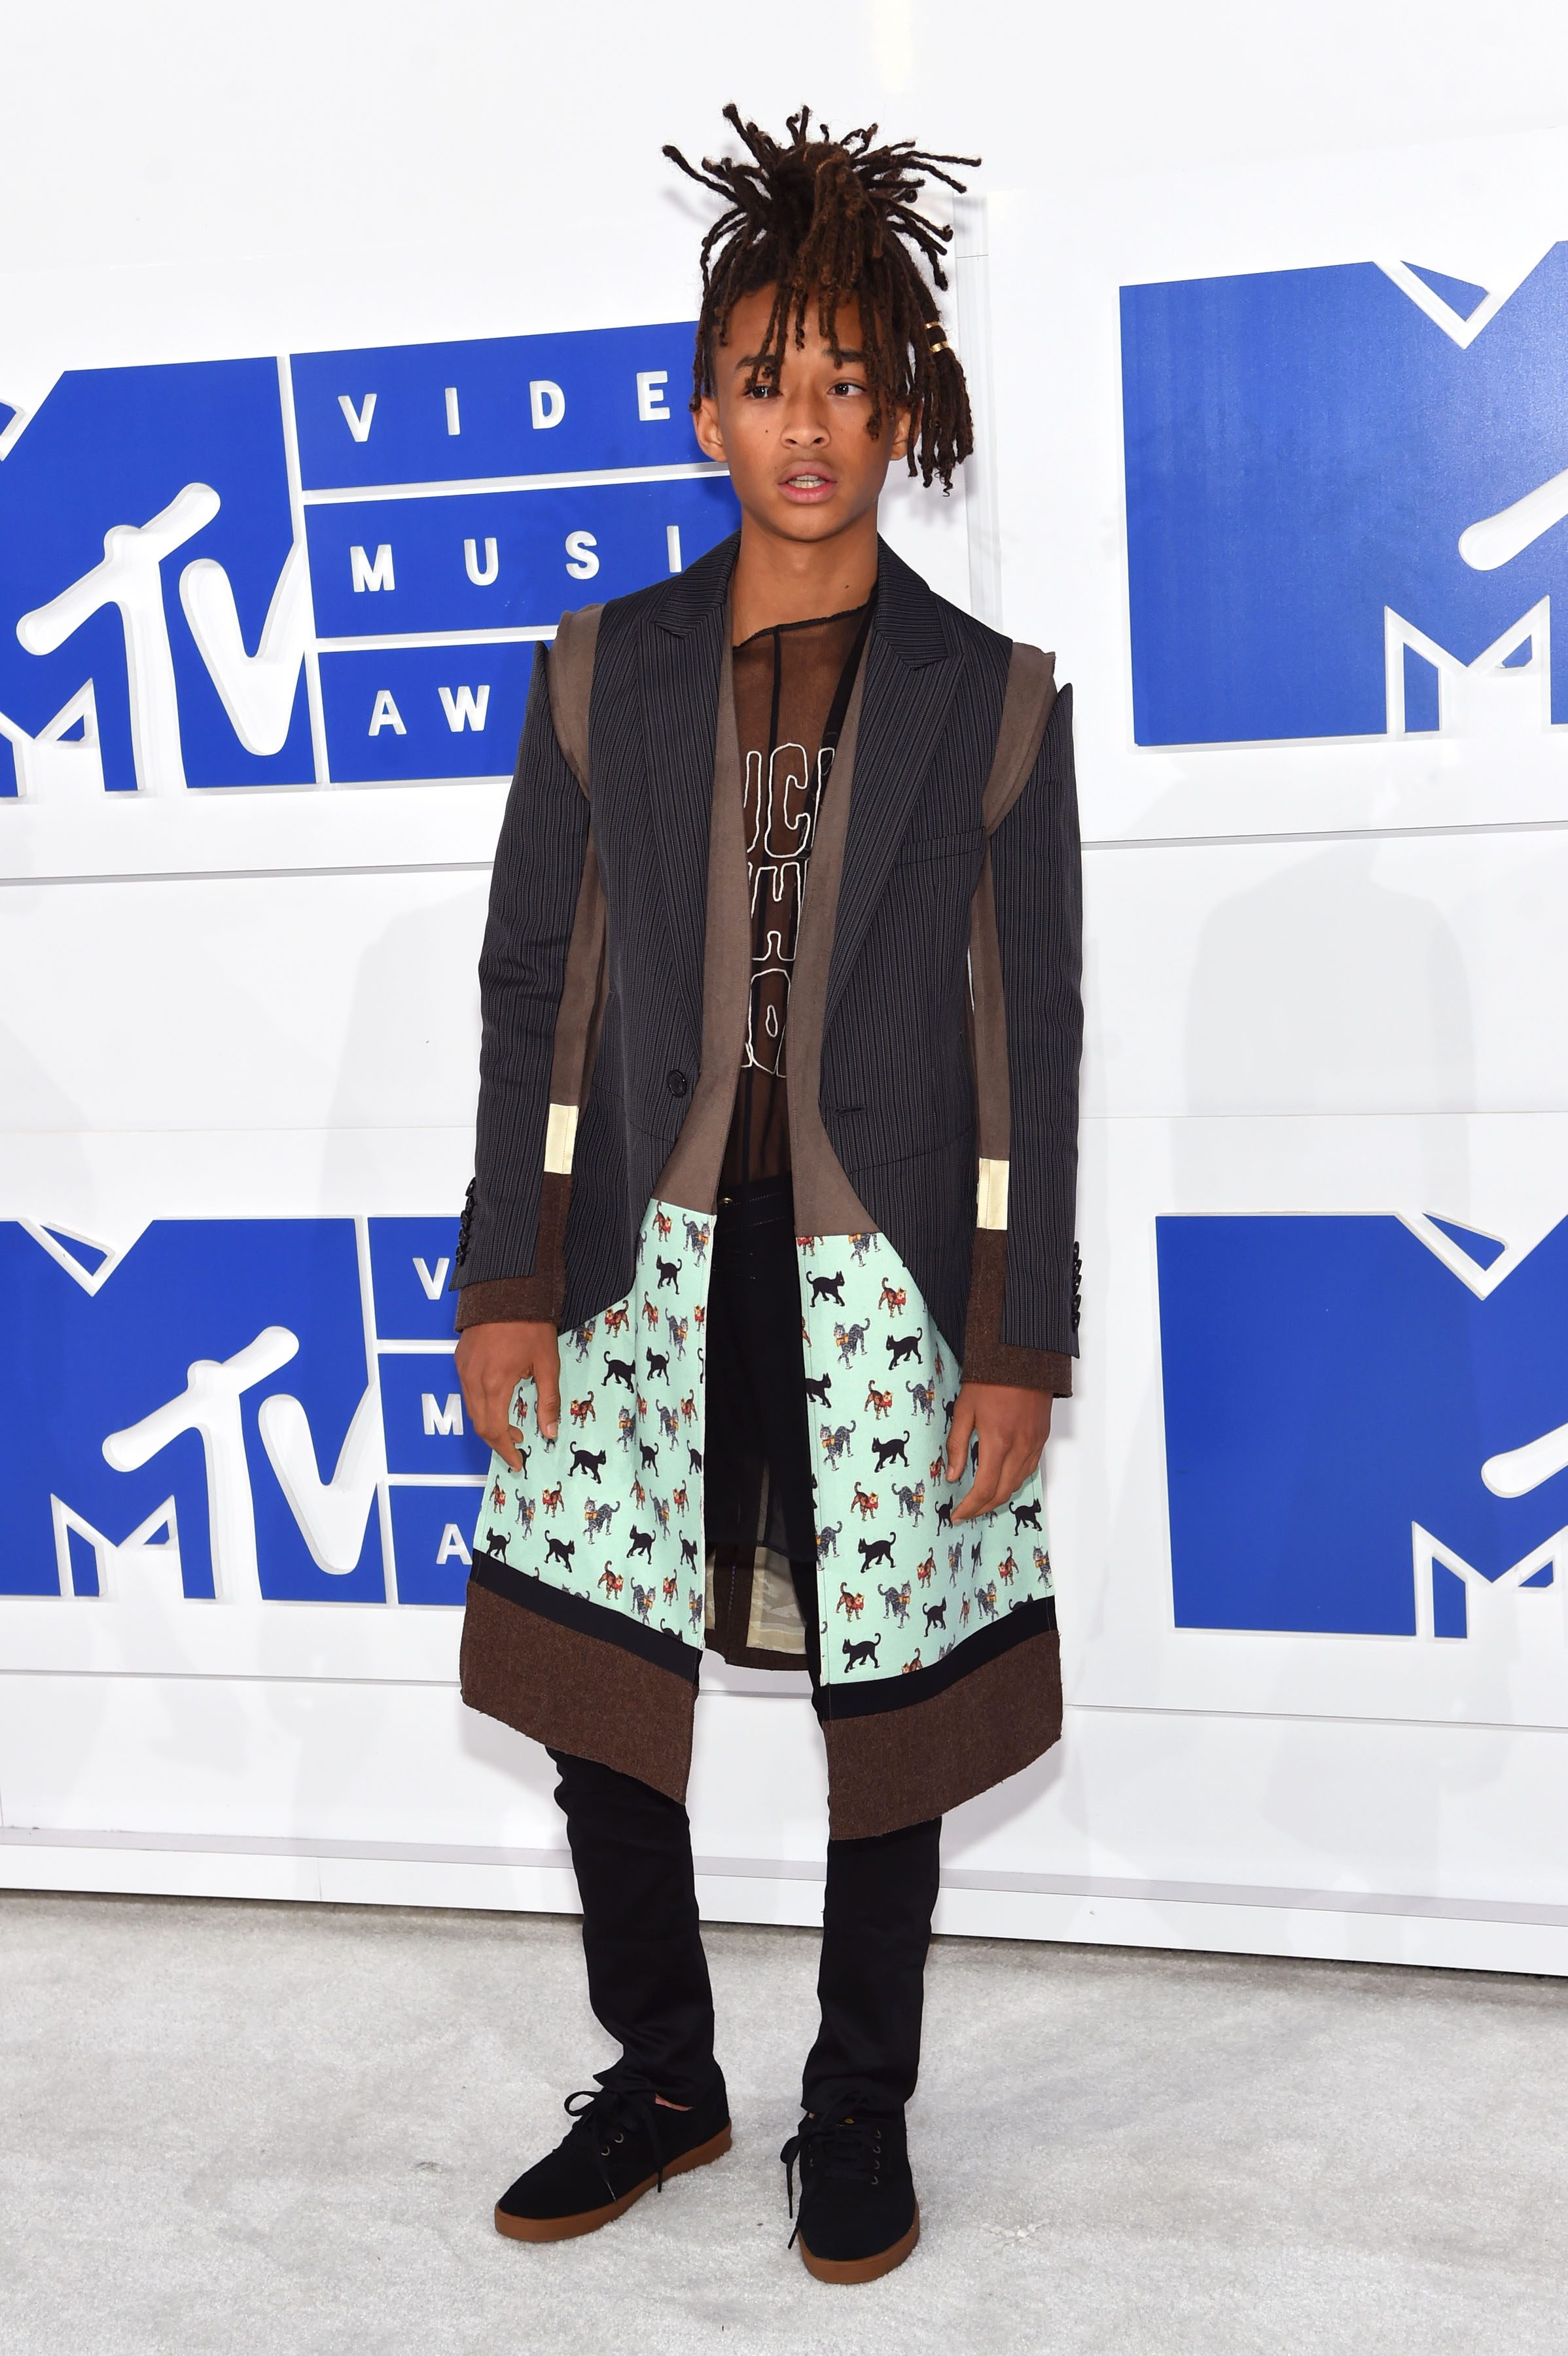 NEW YORK, NY - AUGUST 28: Jaden Smith attends the 2016 MTV Video Music Awards at Madison Square Garden on August 28, 2016 in New York City. Jamie McCarthy/Getty Images/AFP